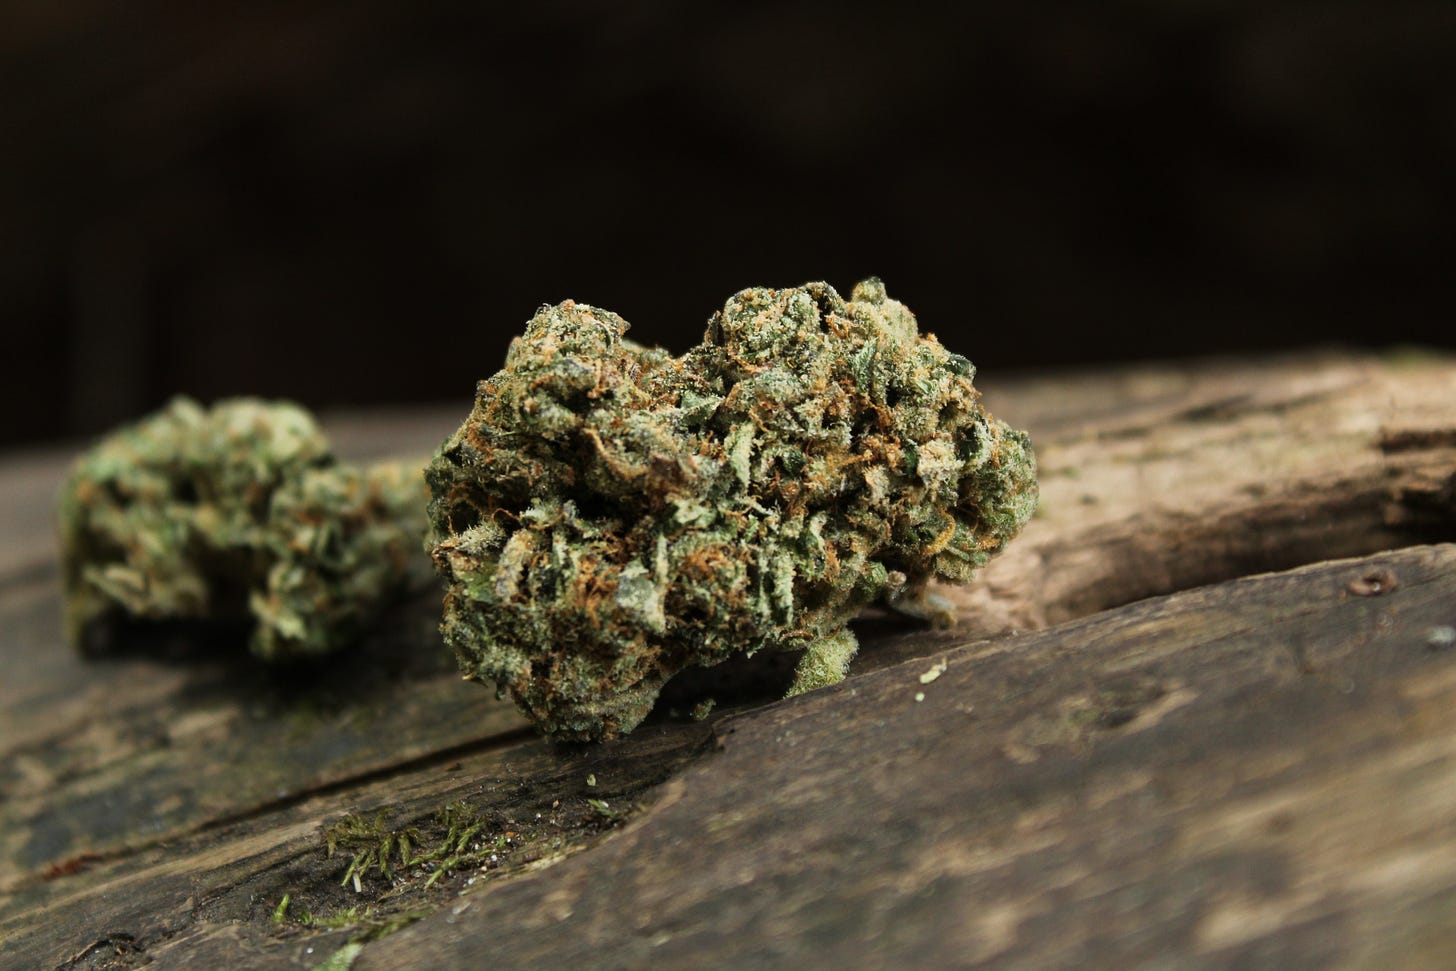 Top 5 Marijuana Strains That'll Make Your Day Brighter – HelloMD